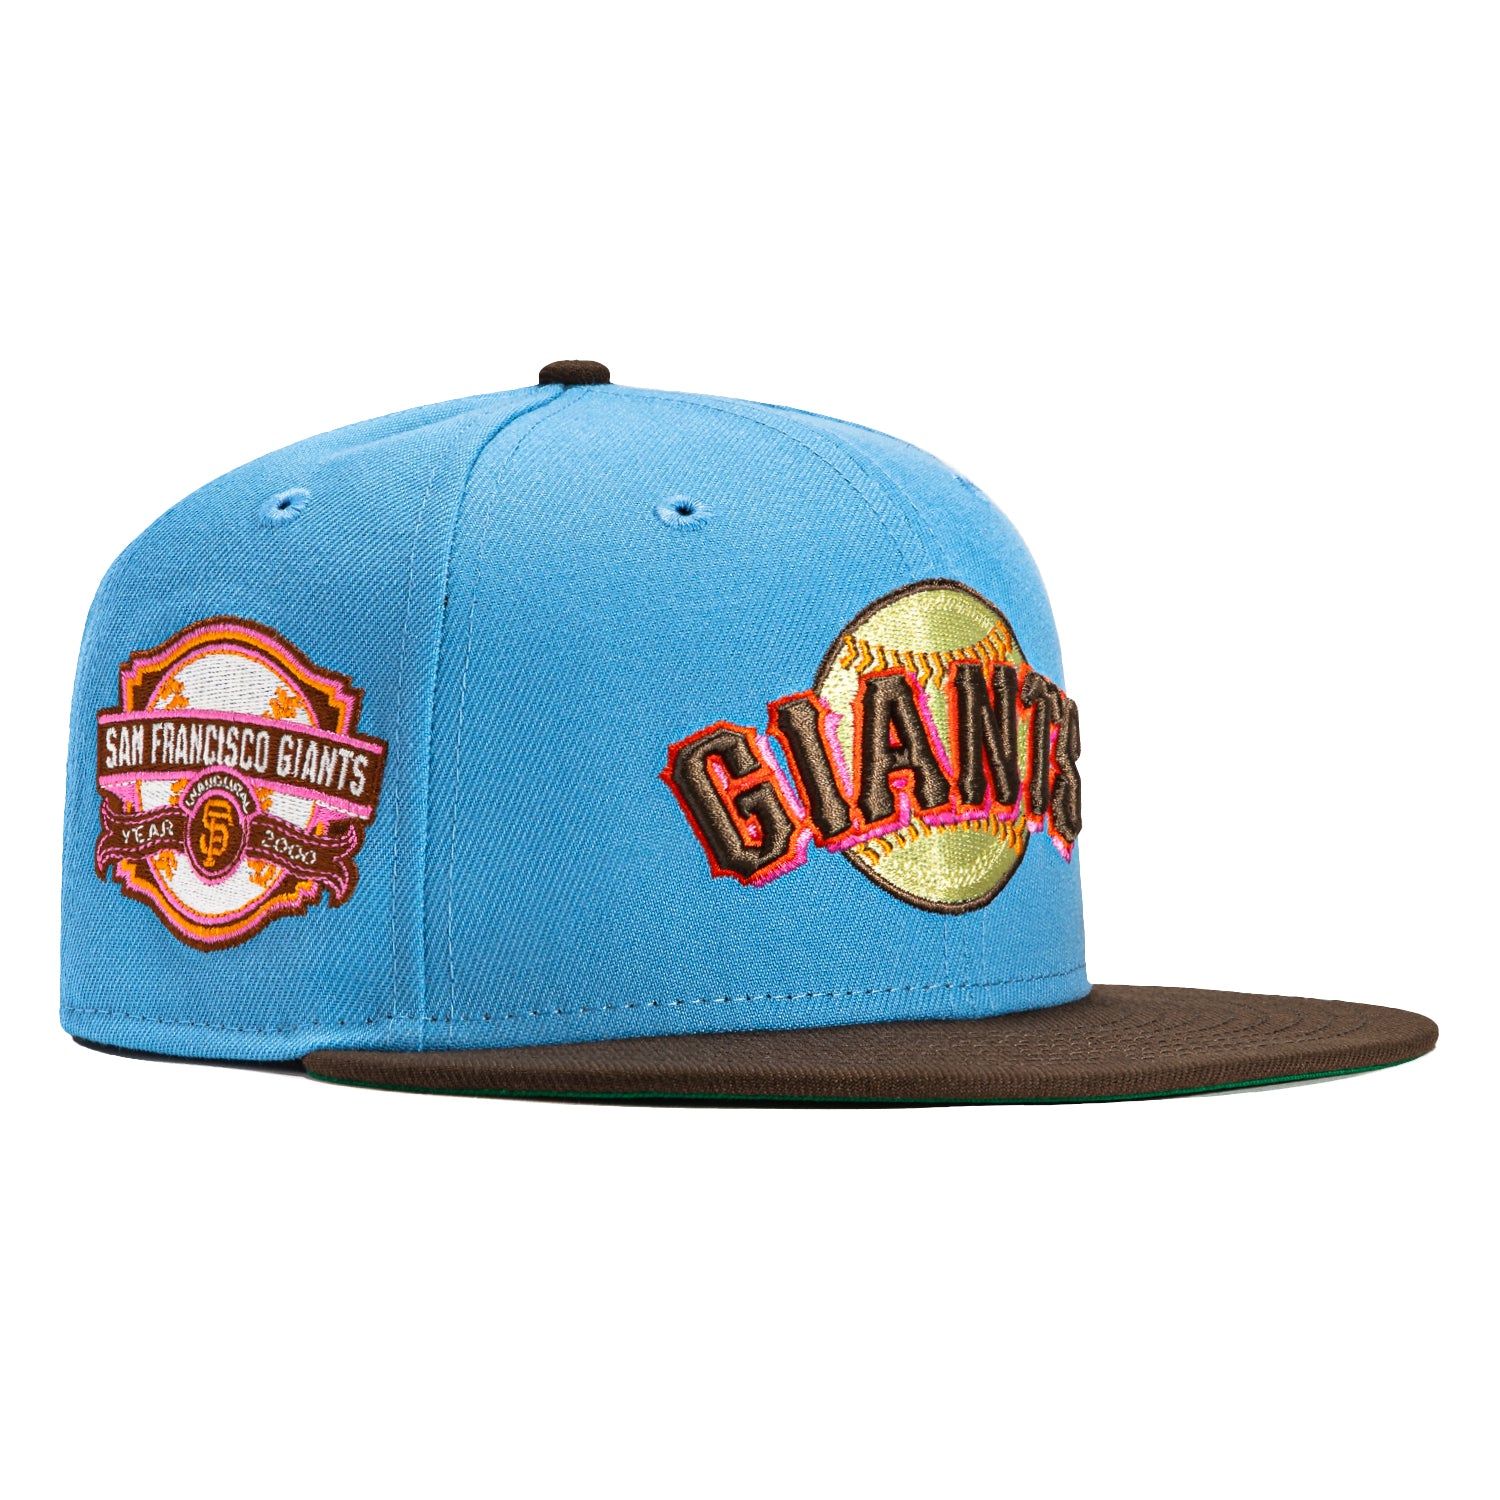 Shop New Era 59Fifty San Francisco Giants Blue Under Fitted Hat